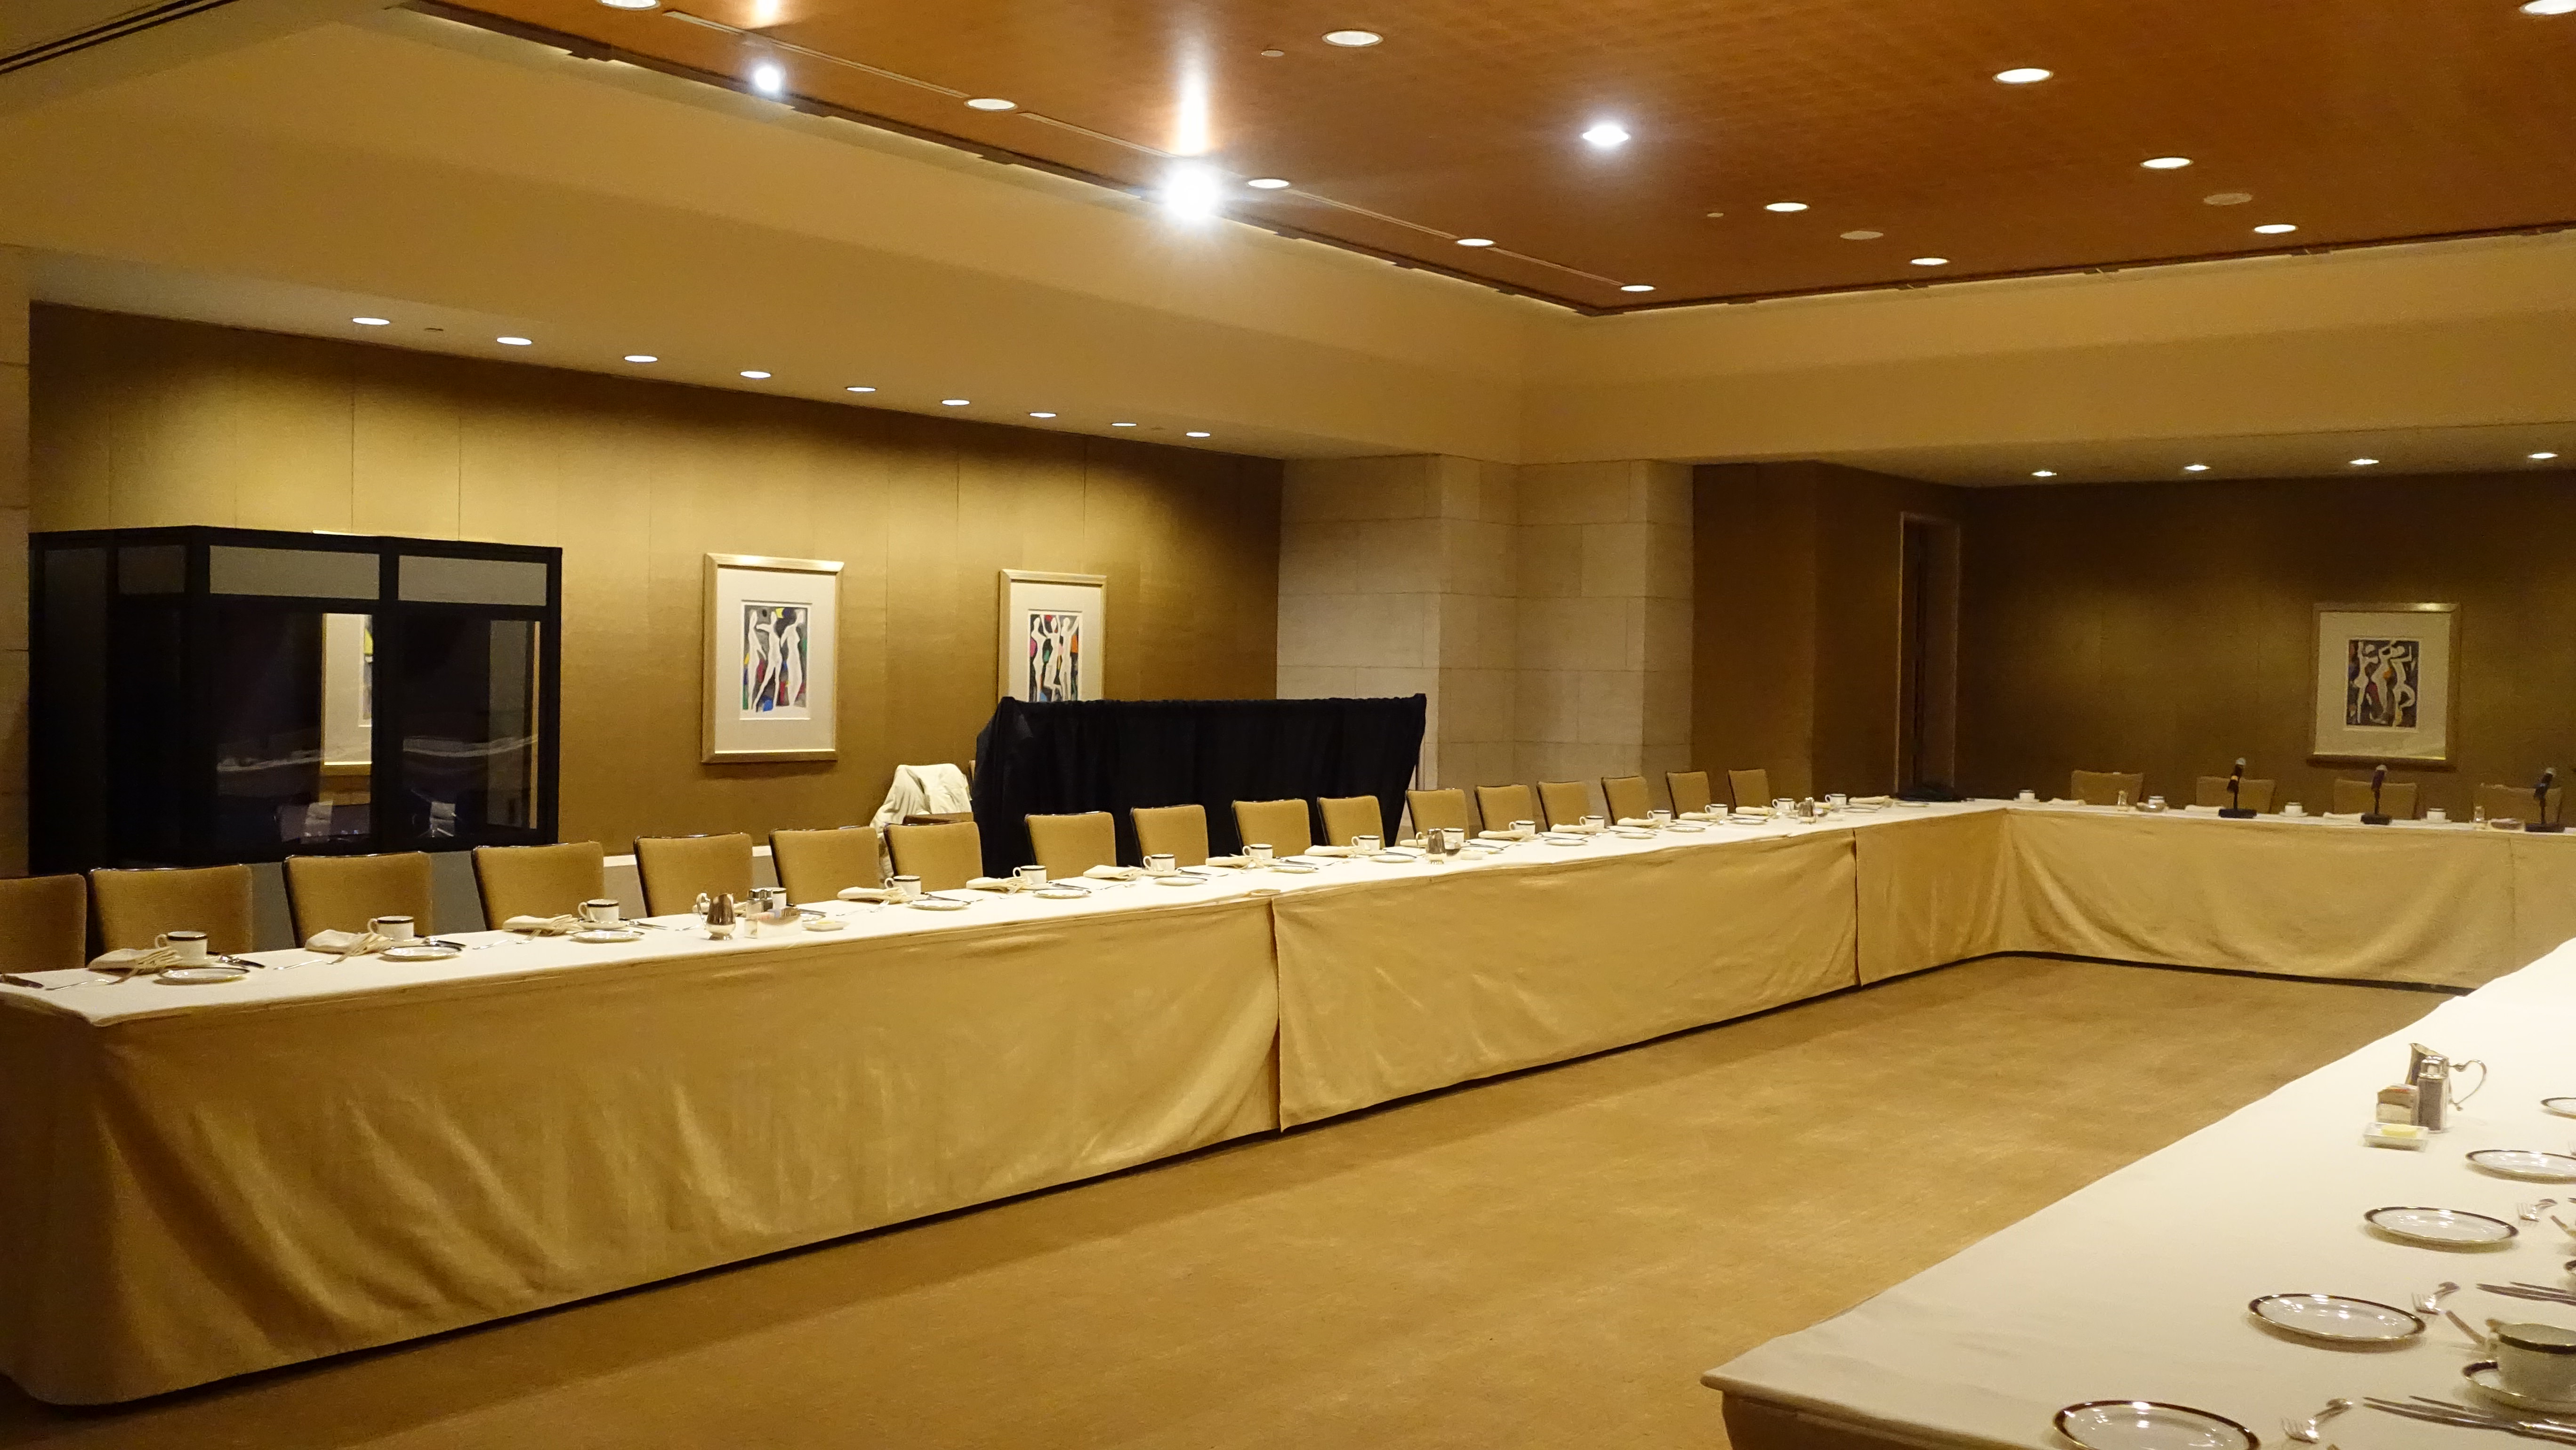 a sound isolation booth in a meeting room with banquet u-shape style seating